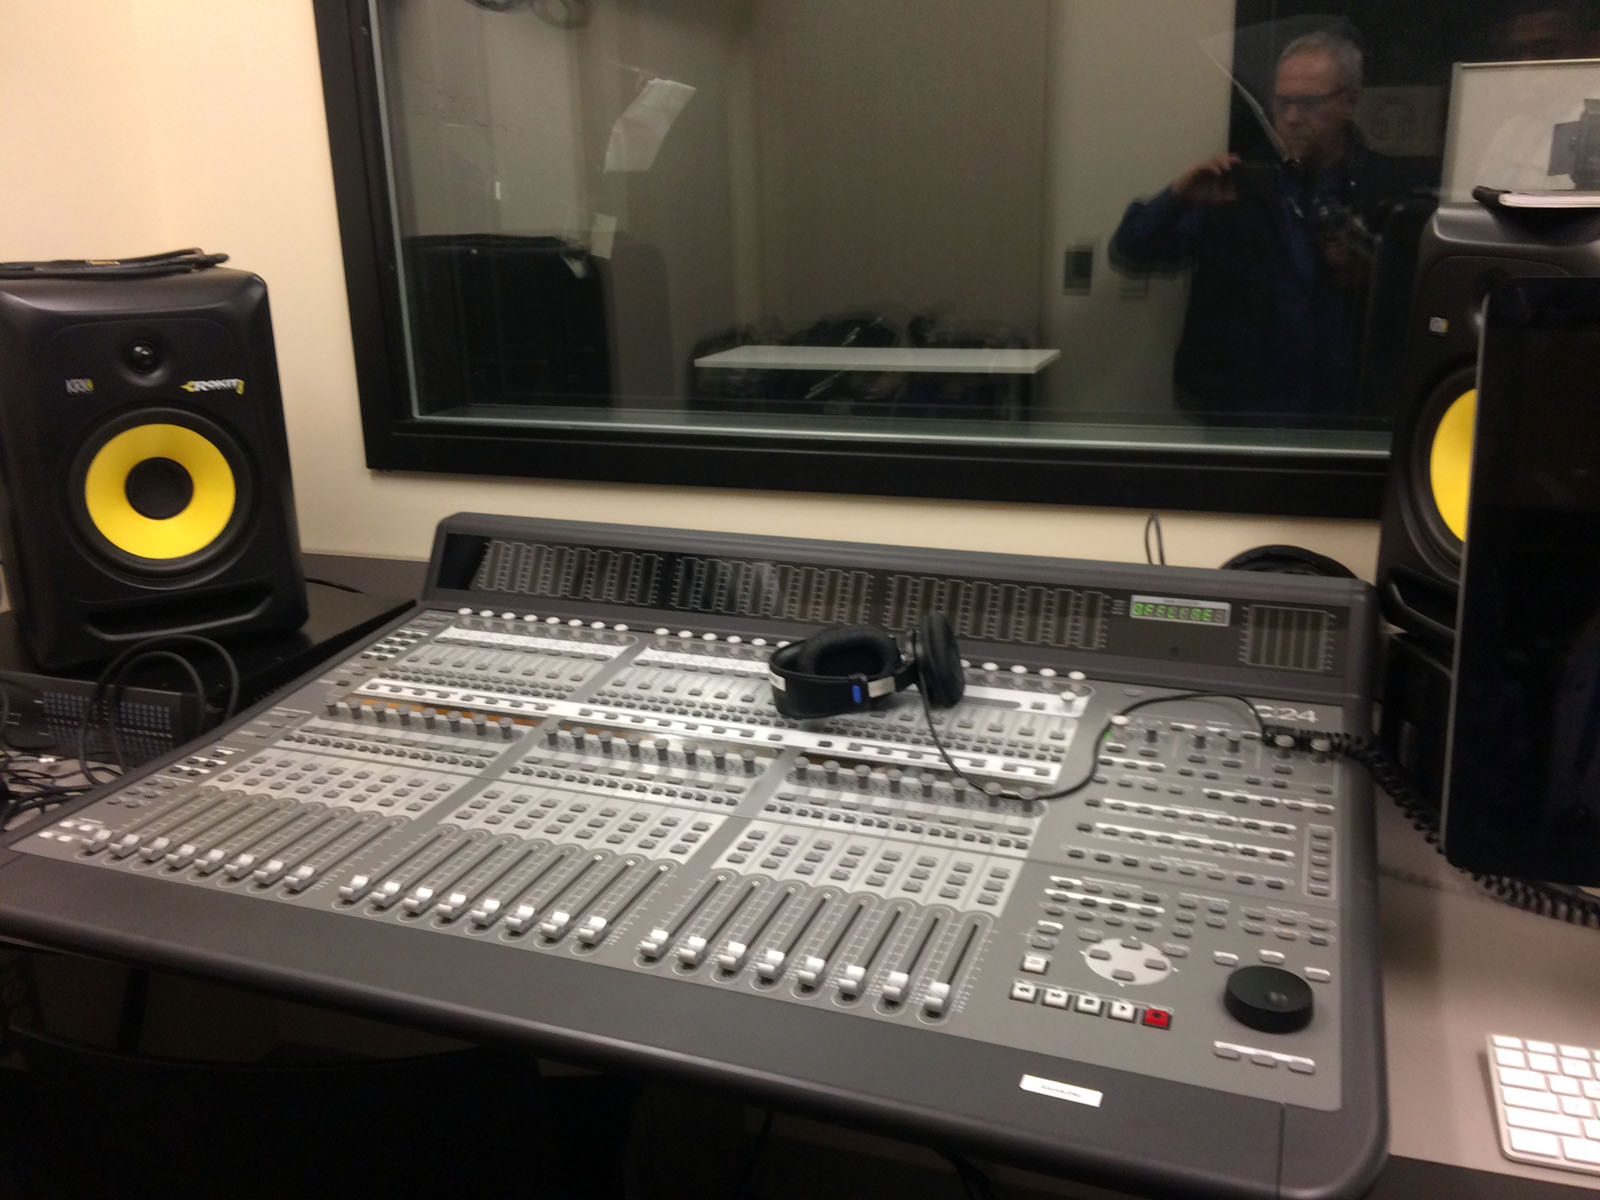 The "Studio Lab" is a full service recording studio, where budding musical artists can explore their own potential. (WTOP/Dick Uliano)